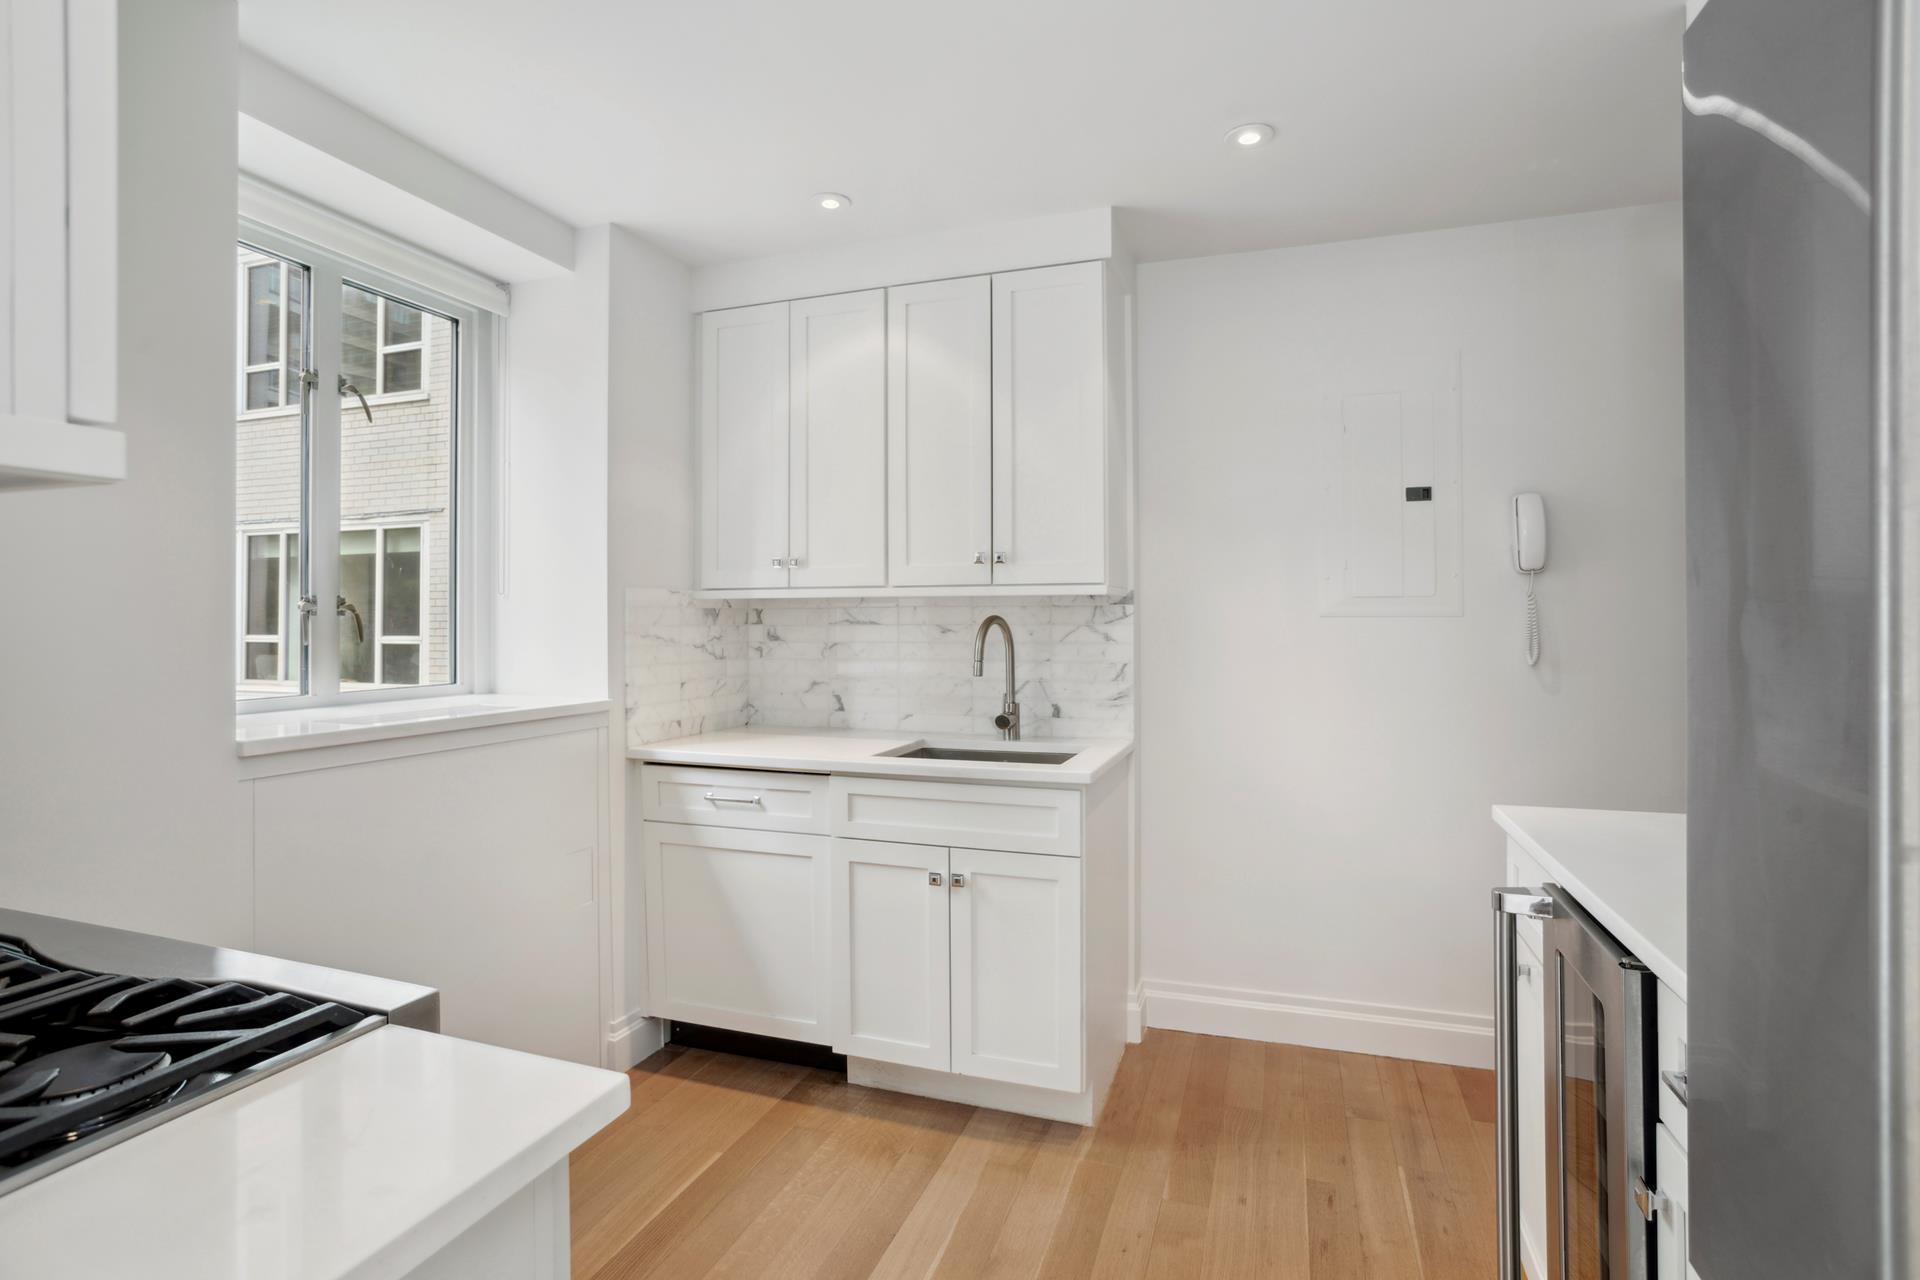 200 East 66th Street D503, Lenox Hill, Upper East Side, NYC - 2 Bedrooms  
2 Bathrooms  
4 Rooms - 